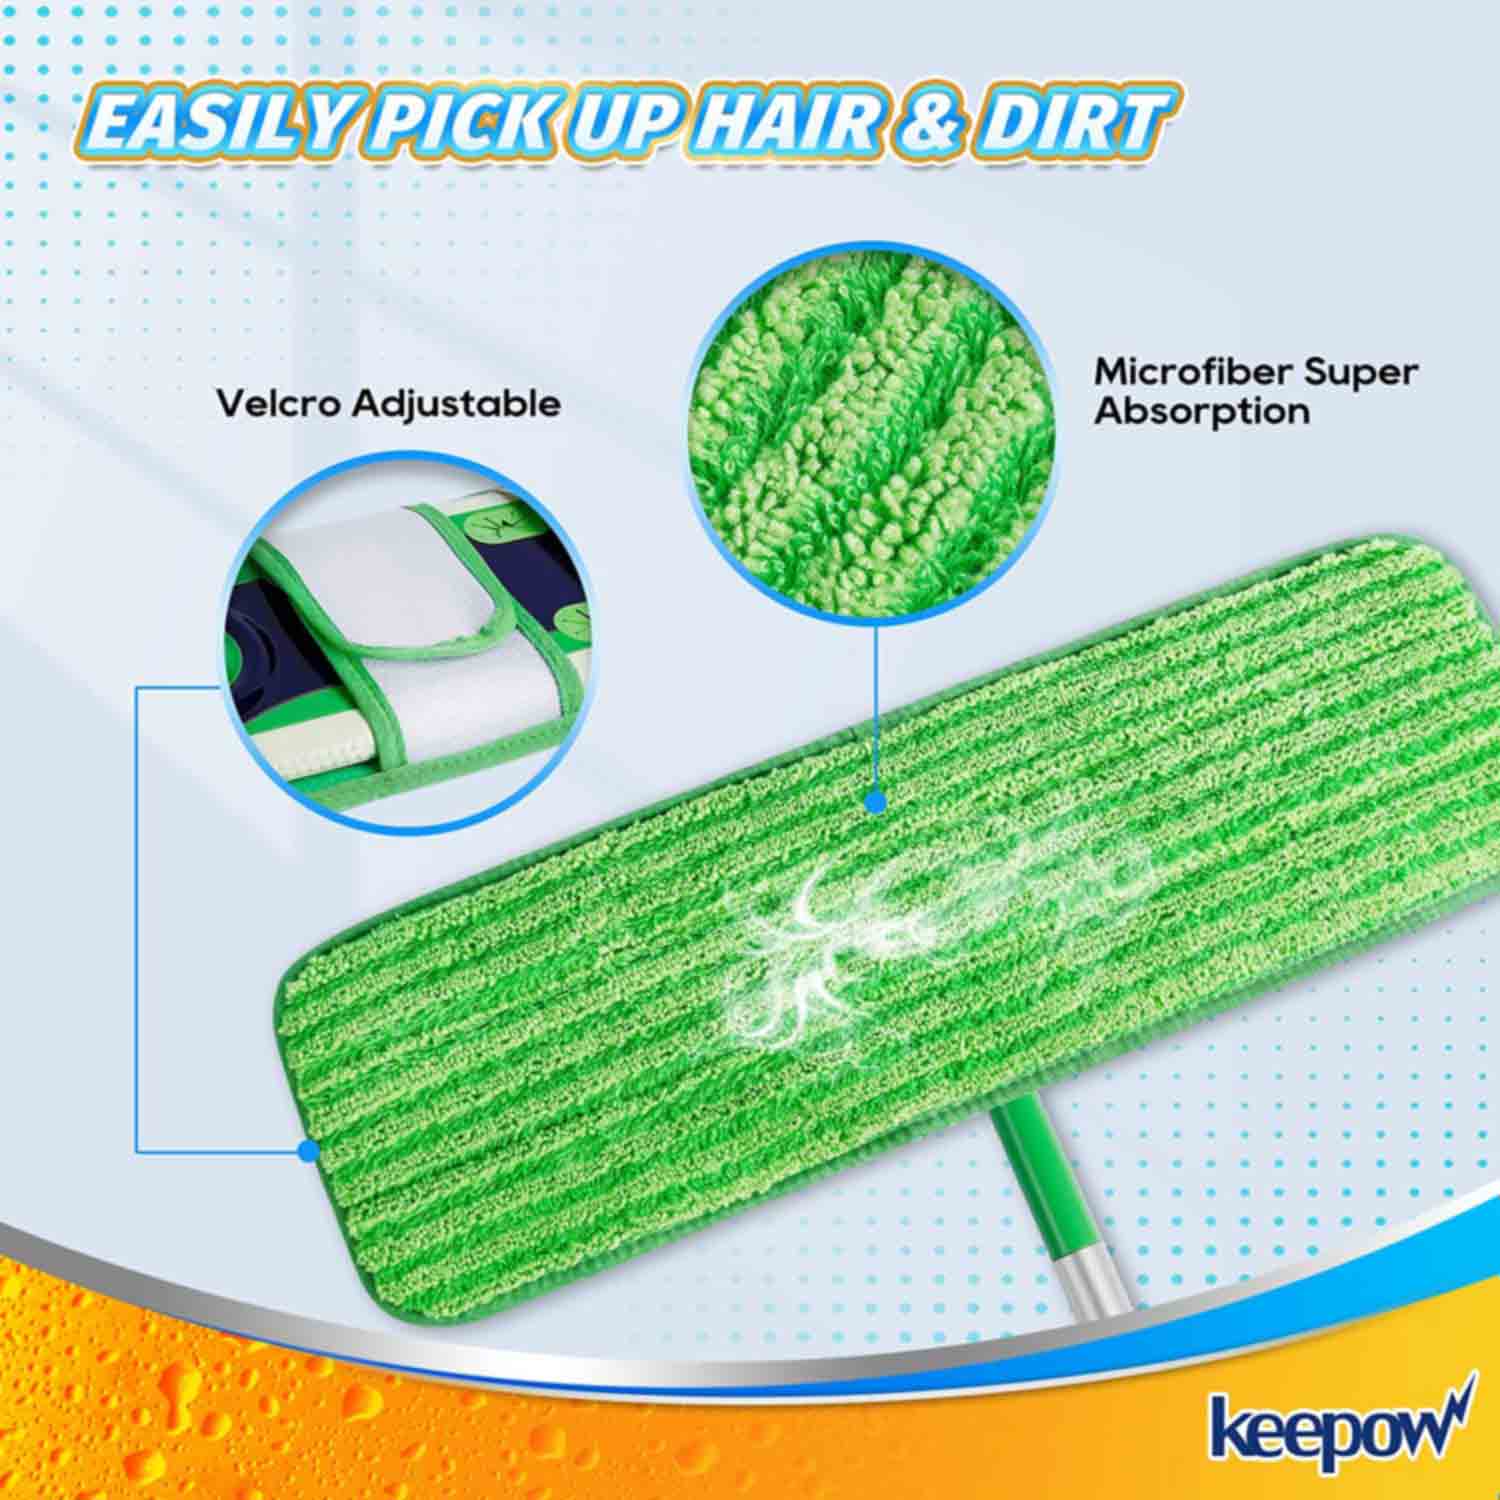 Reusable Microfiber Mop Pads for Hardwood Floor, 2 Pack by keepow